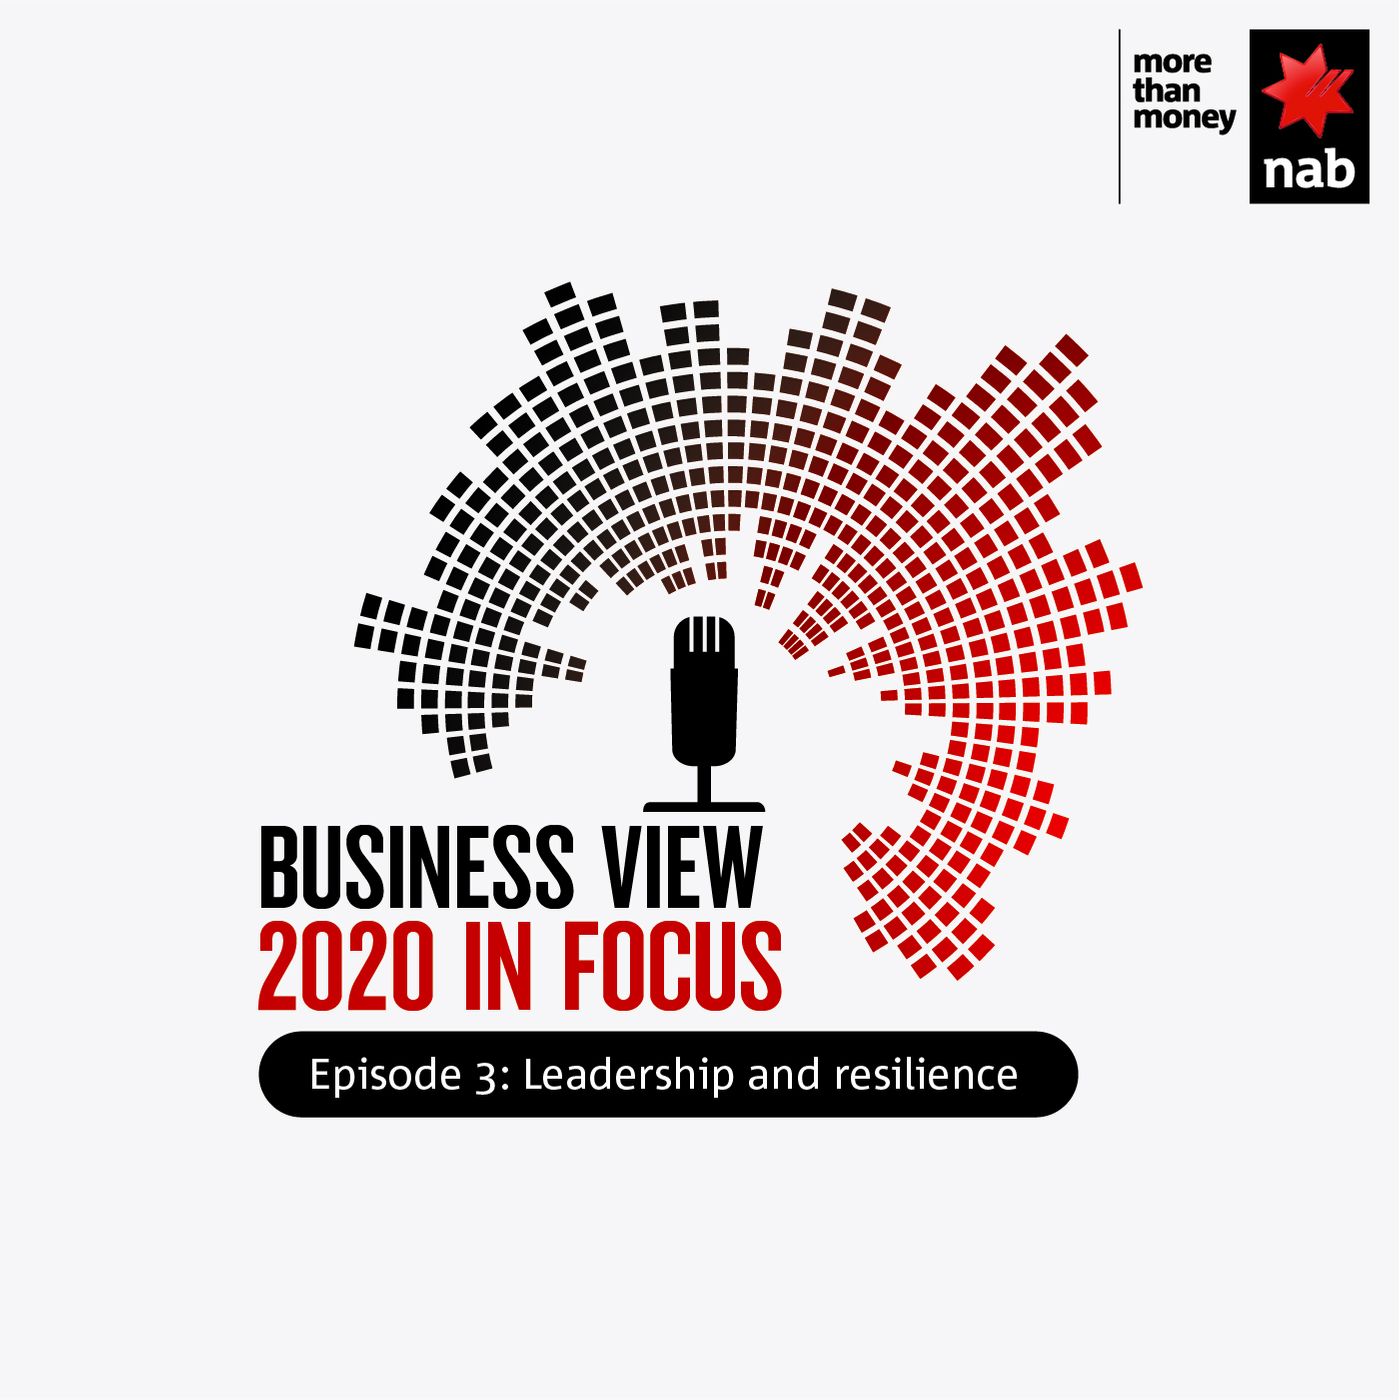 Business View 2020 In Focus Episode 3: Leadership and resilience